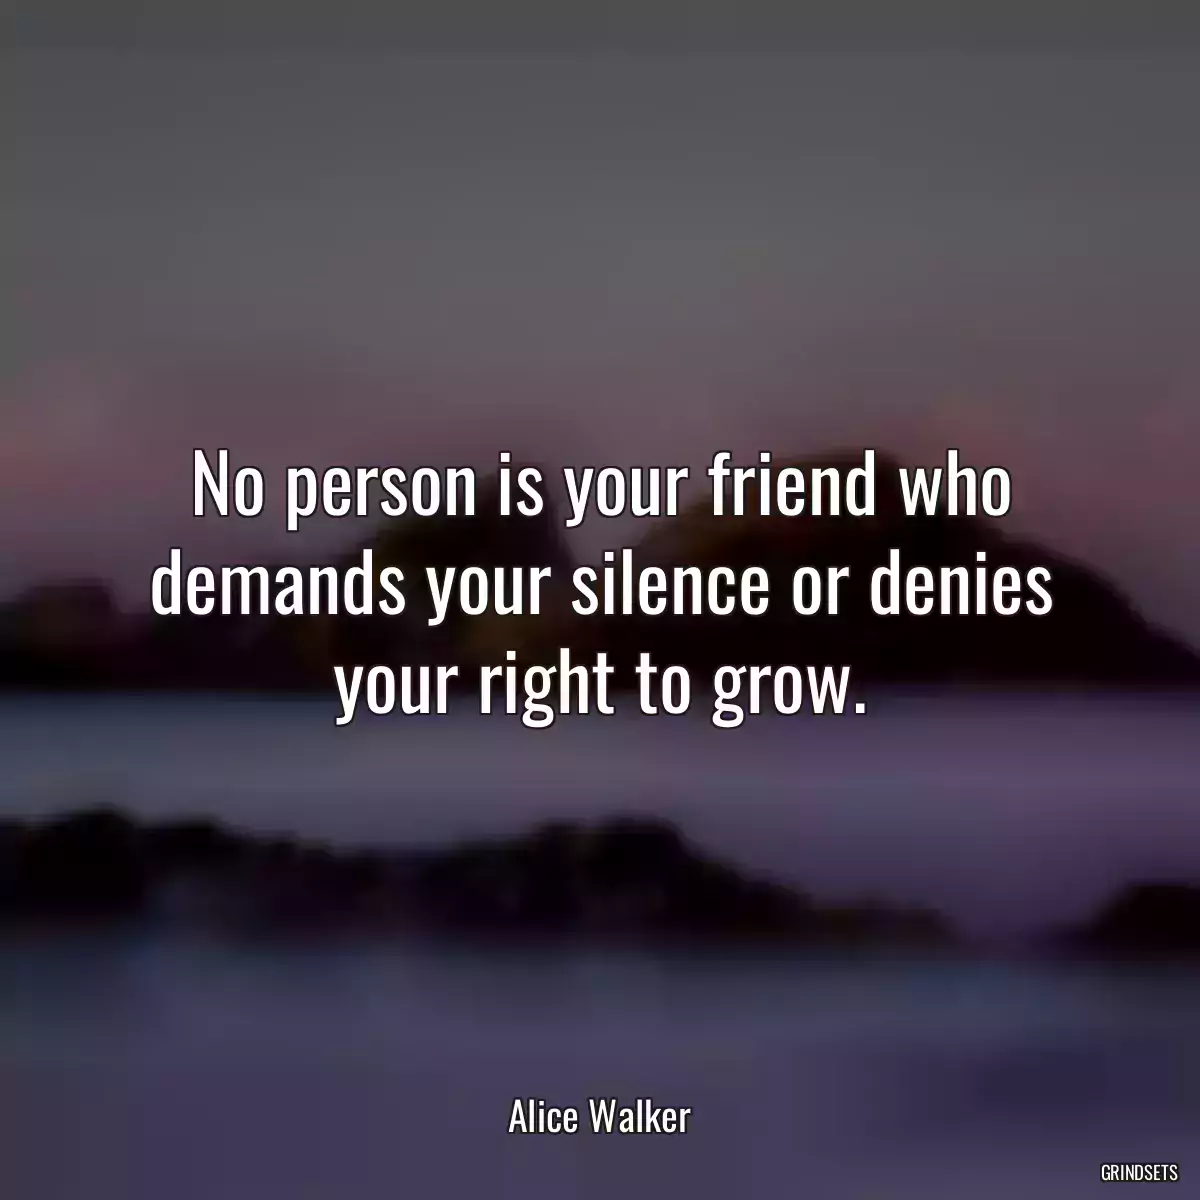 No person is your friend who demands your silence or denies your right to grow.